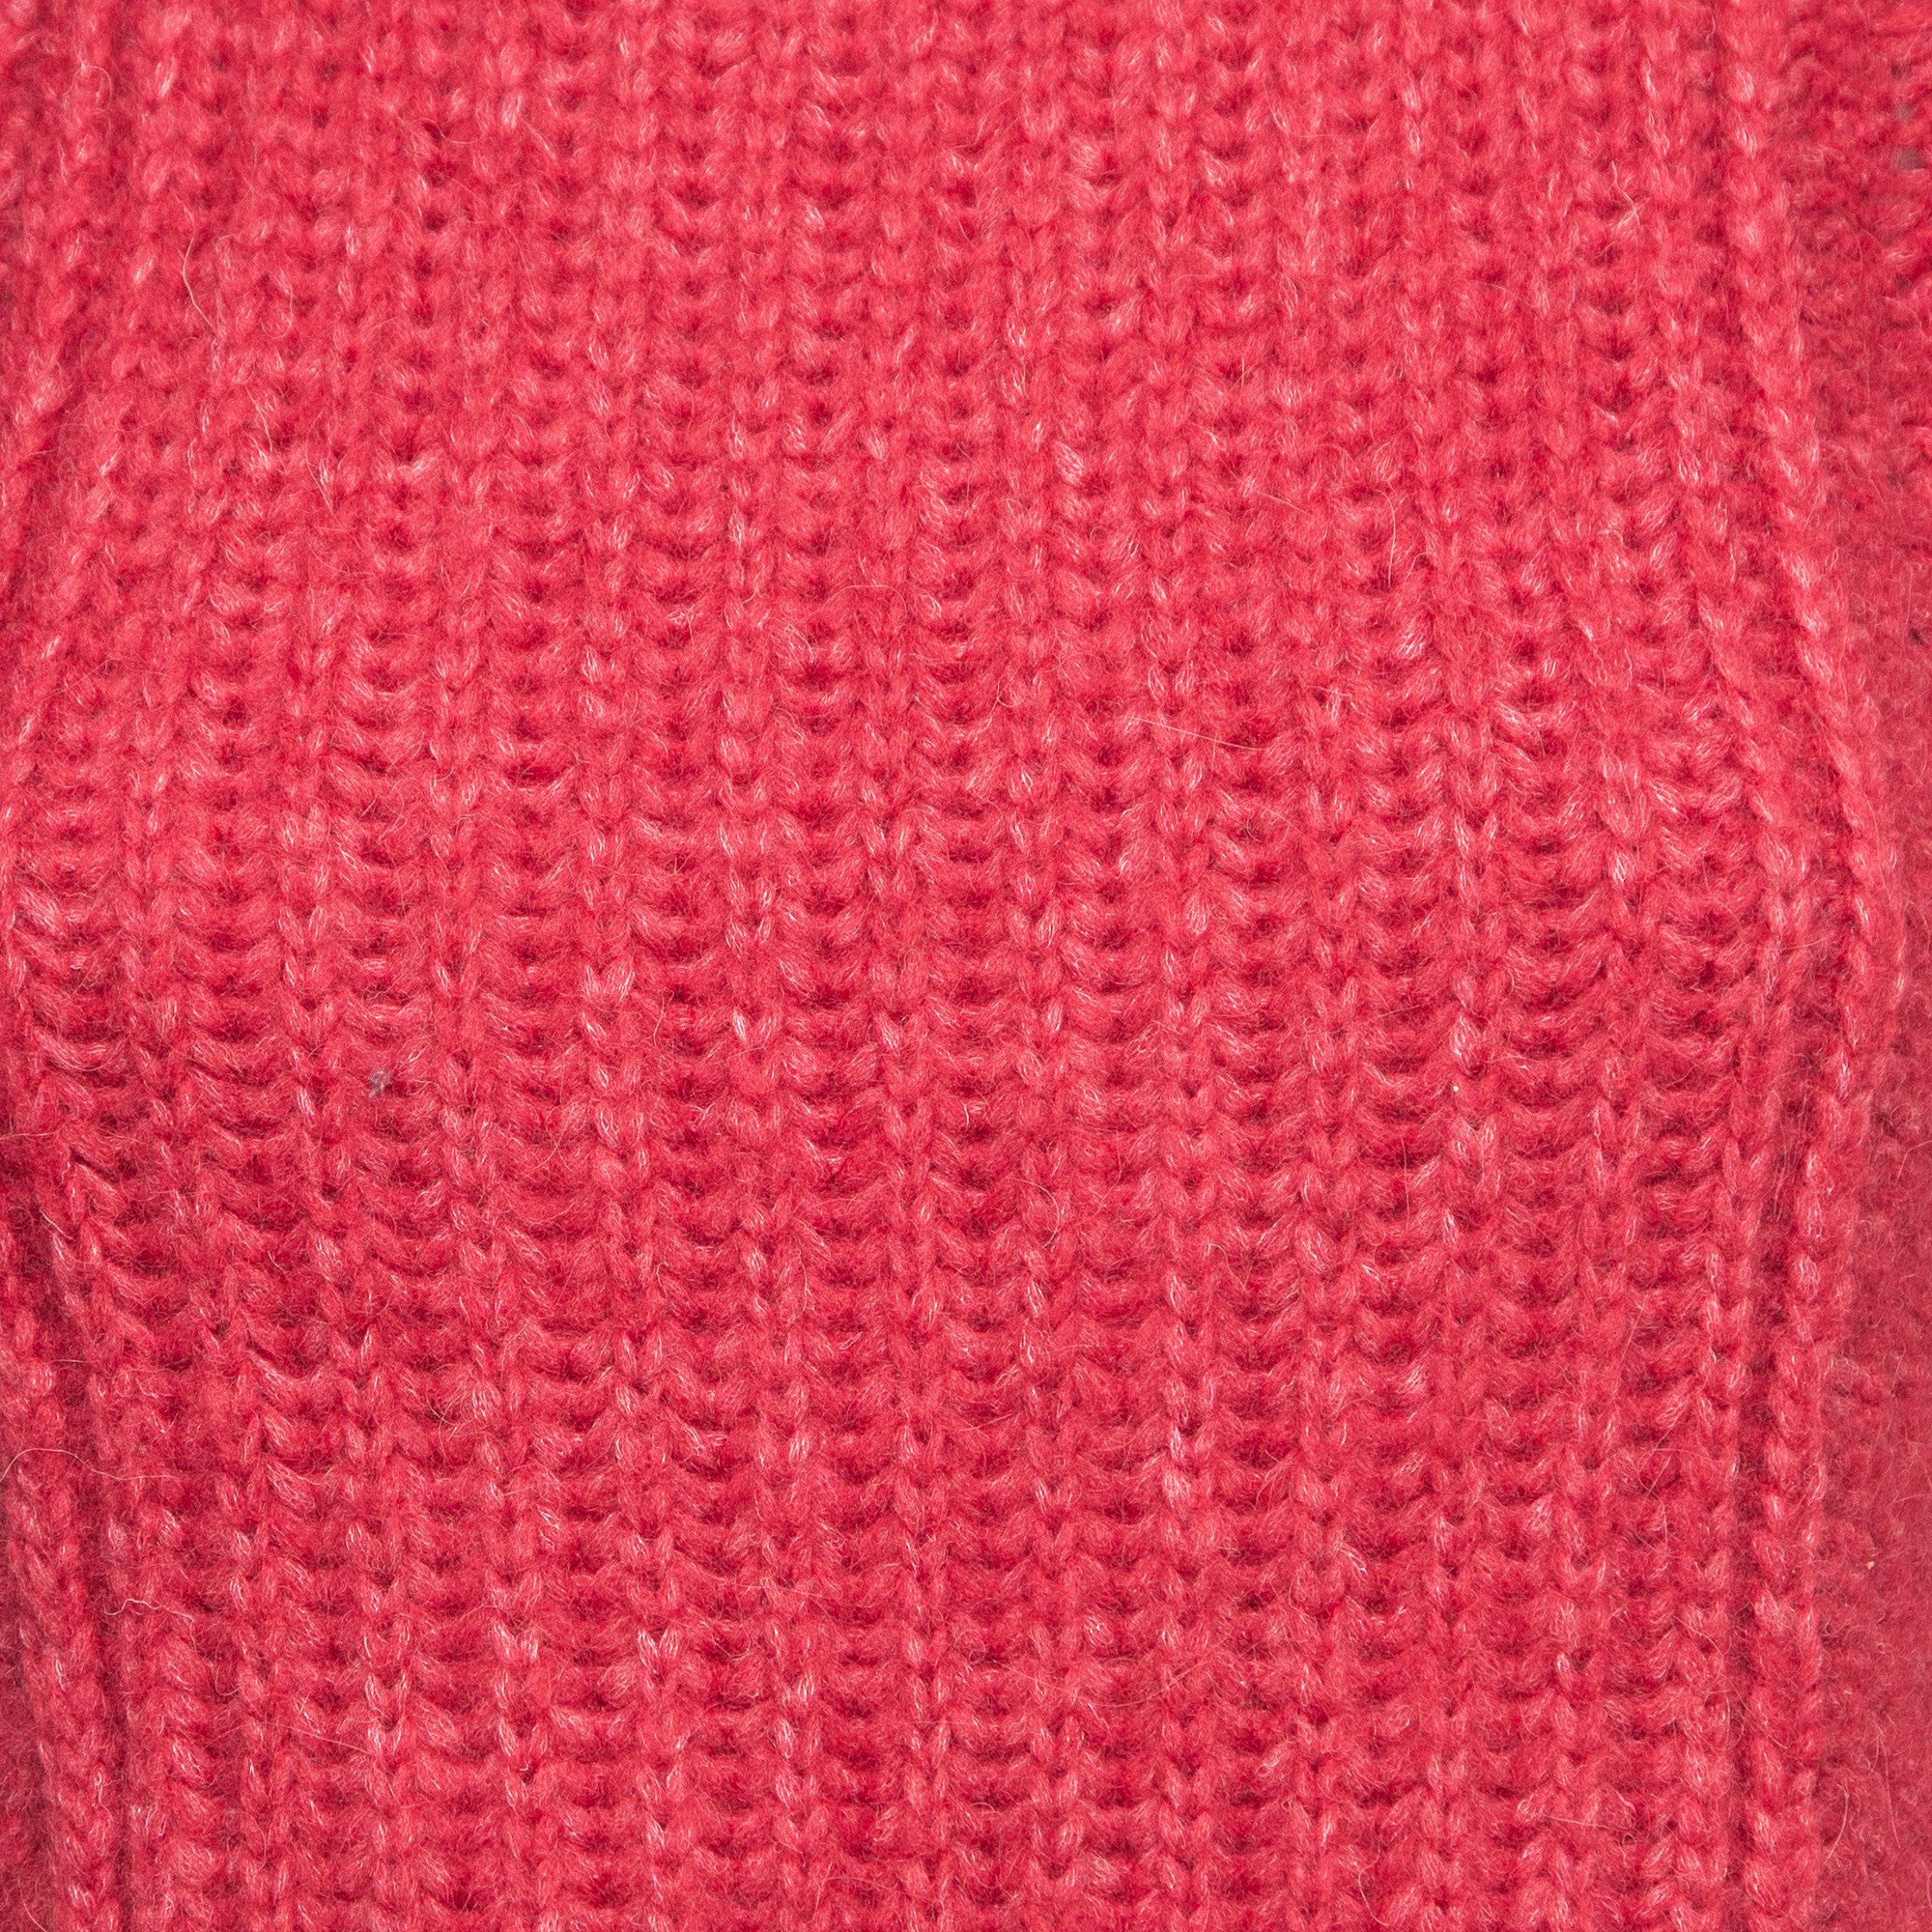 Stella McCartney Red Wool Knit Flared Sweater Top S